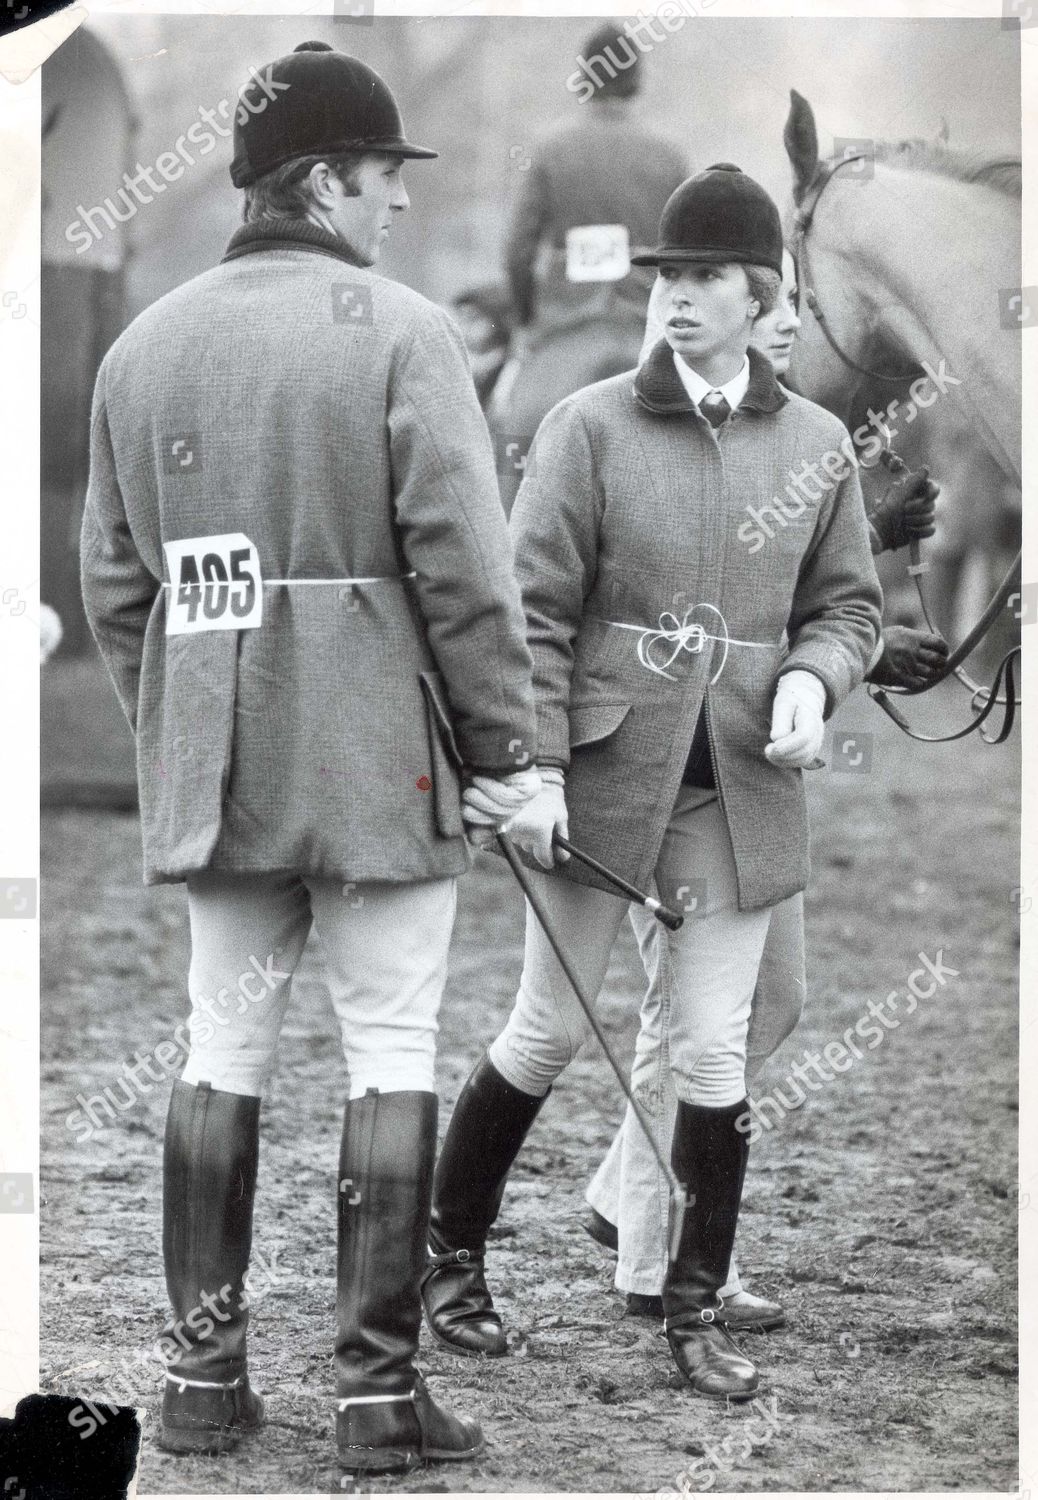 princess-royal-capt-mark-phillips-riding-march-1974-princess-anne-and-capt-mark-phillips-at-amberley-horse-trials-royalty-shutterstock-editorial-892202a.jpg